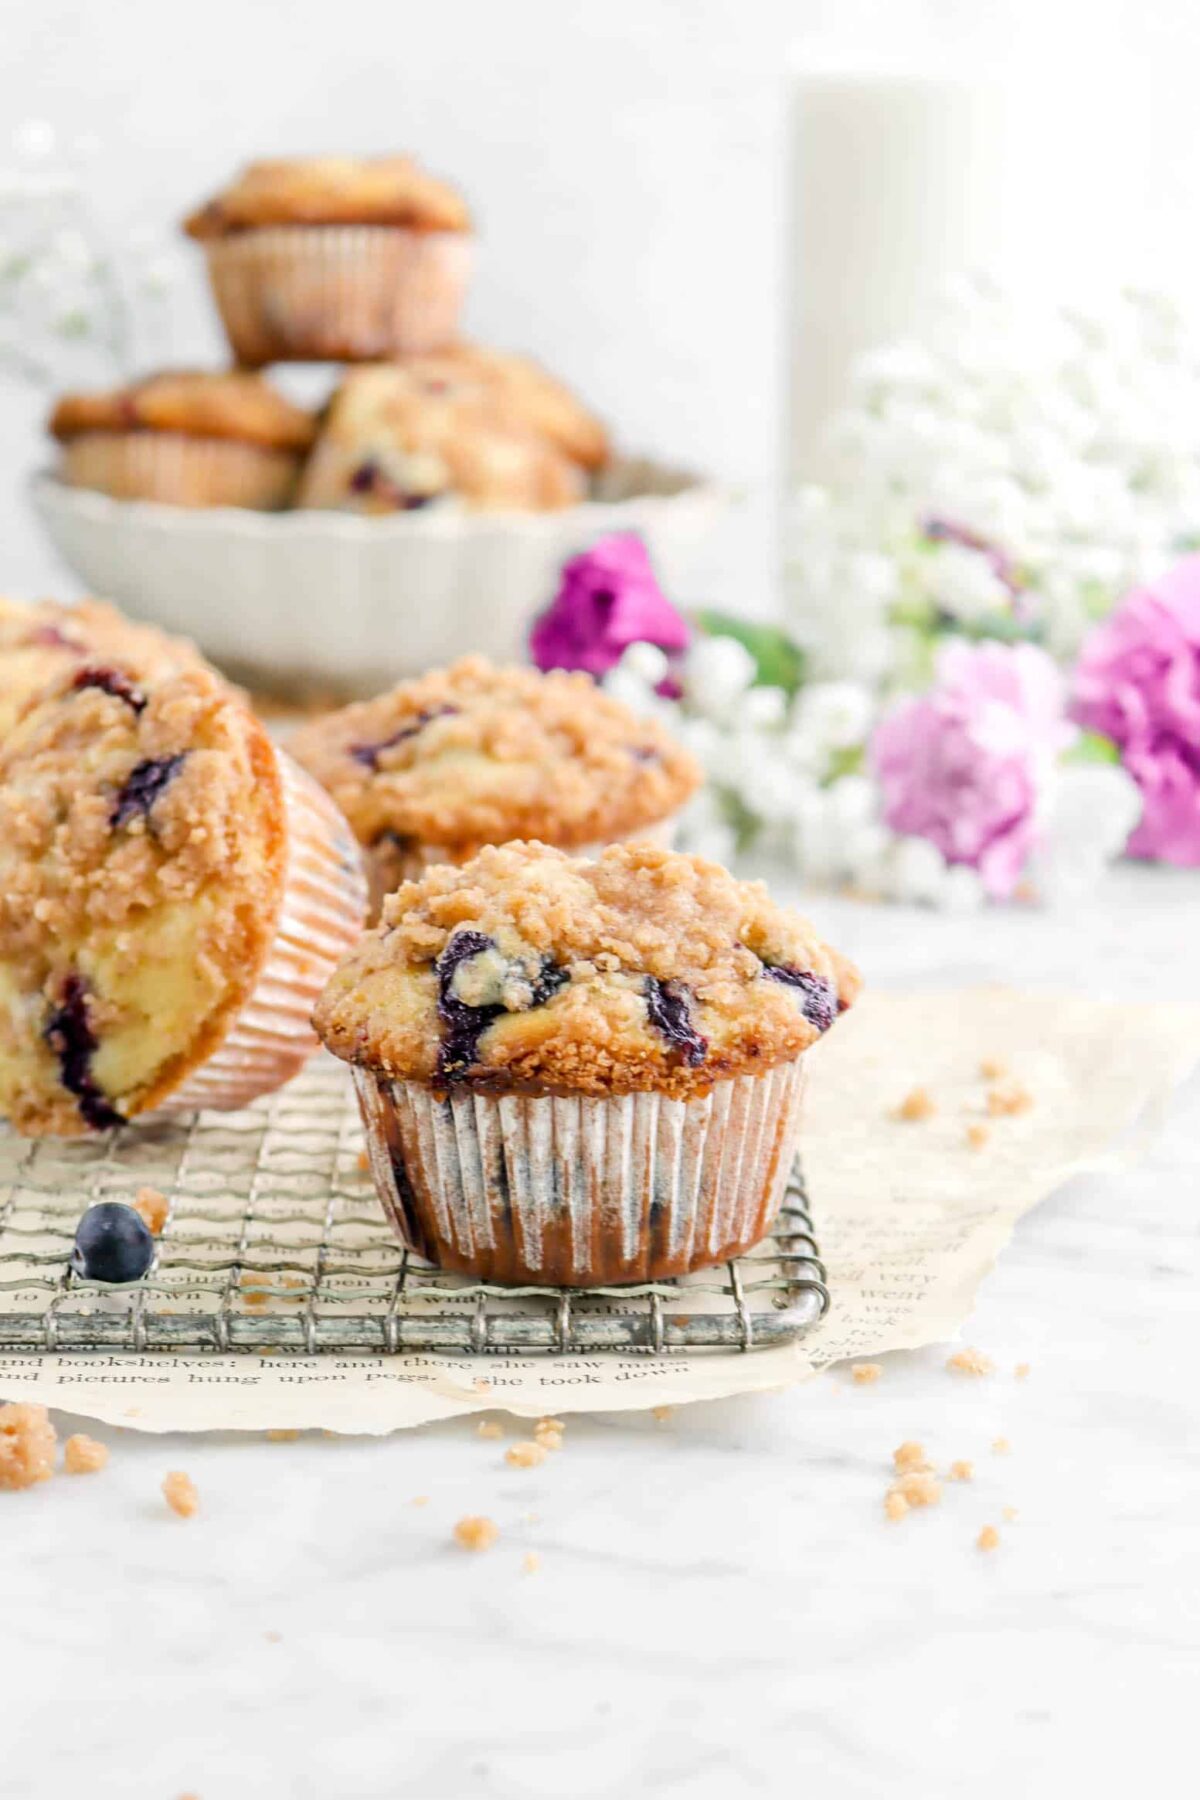 Bakery-Style Lemon Blueberry Muffins with Crunchy Cinnamon Streusel